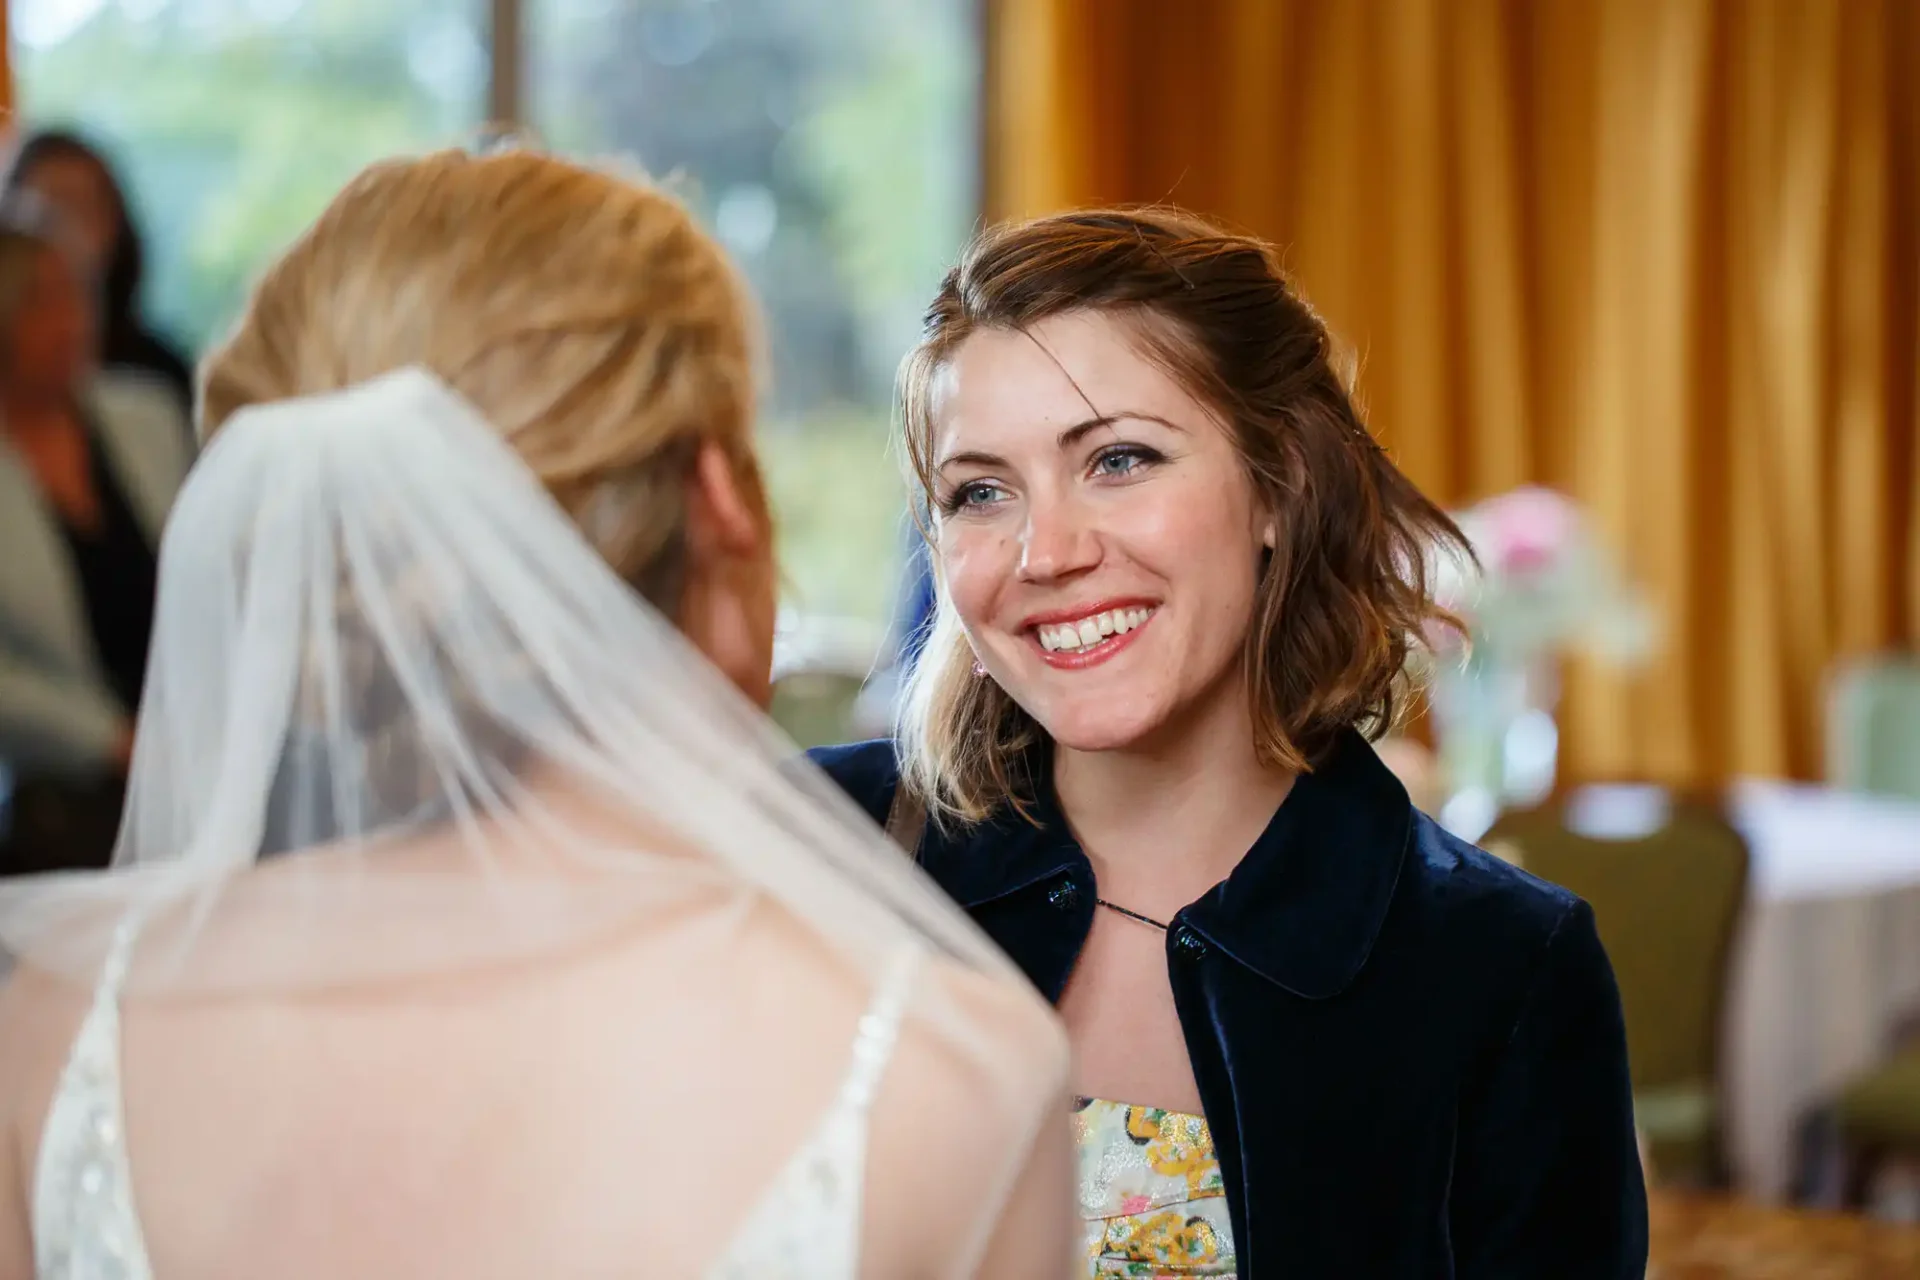 A smiling woman in a floral dress and black jacket converses with a bride whose back is to the camera, in a room with elegant decor.